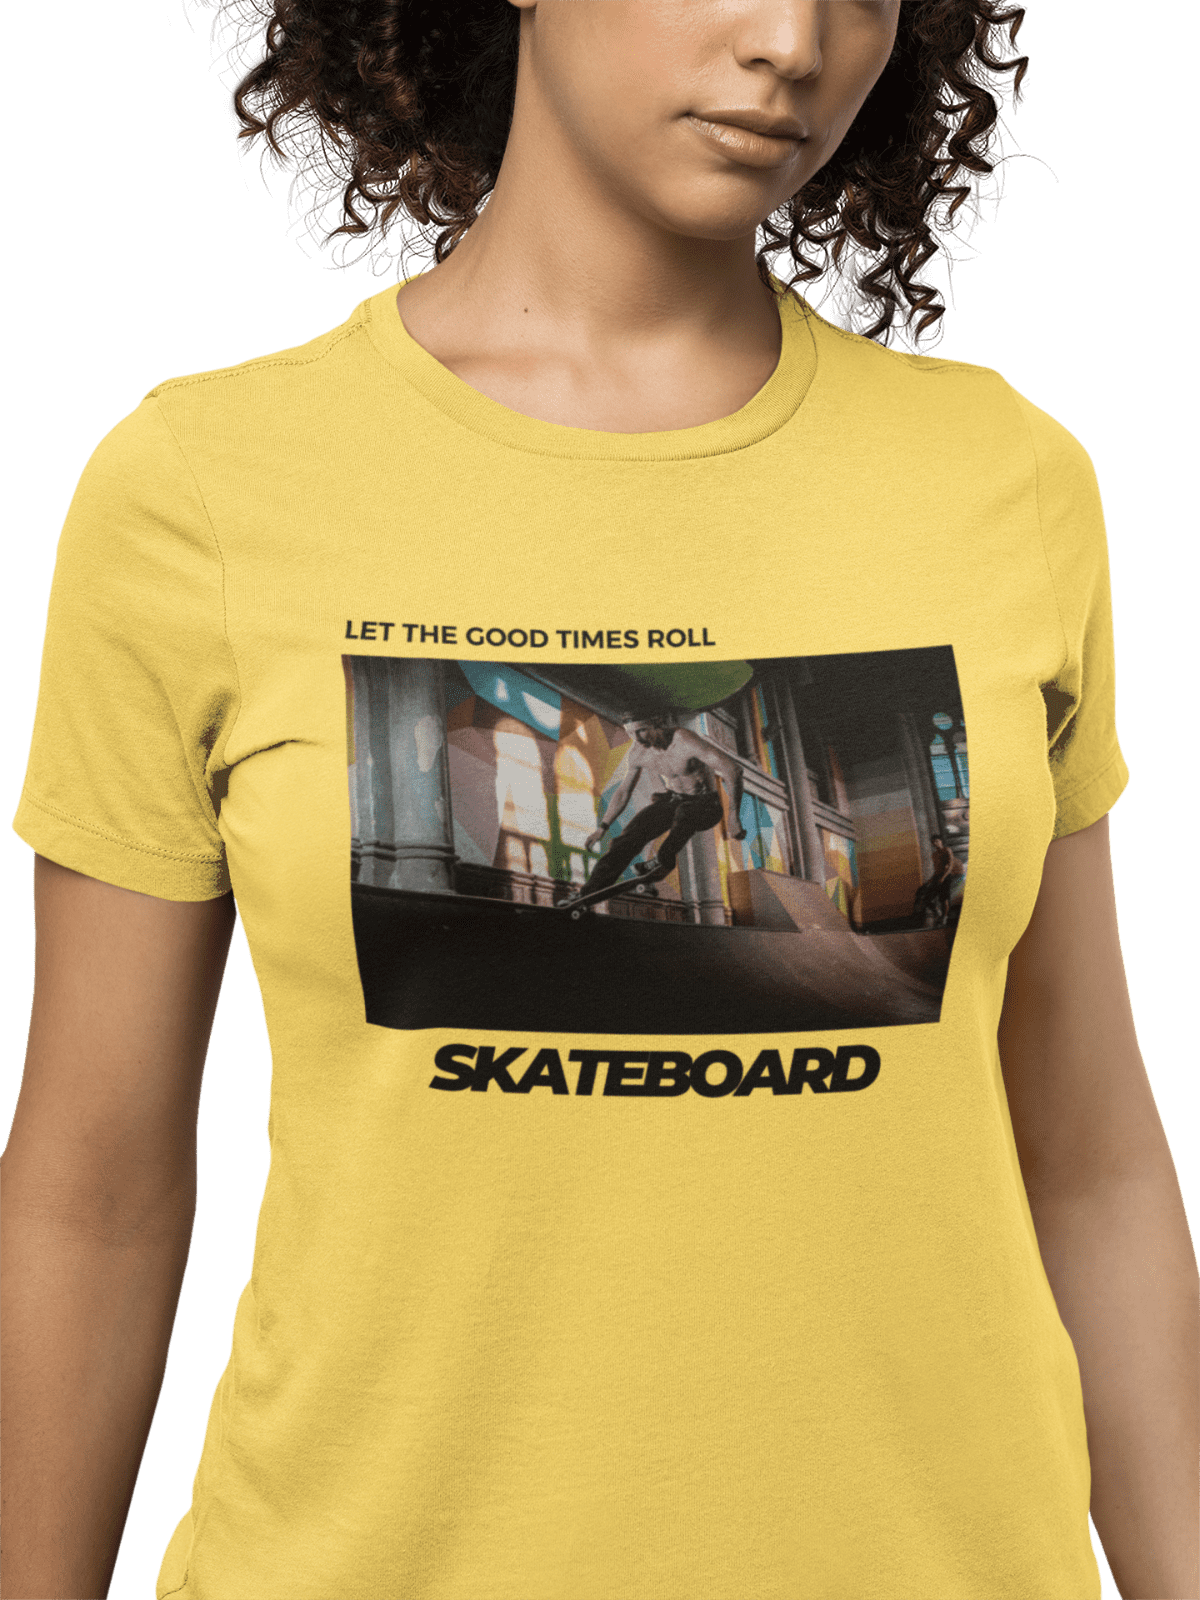 Skateboard Shirt, This Is How I Roll, Skateboard Gift, Unisex Fit